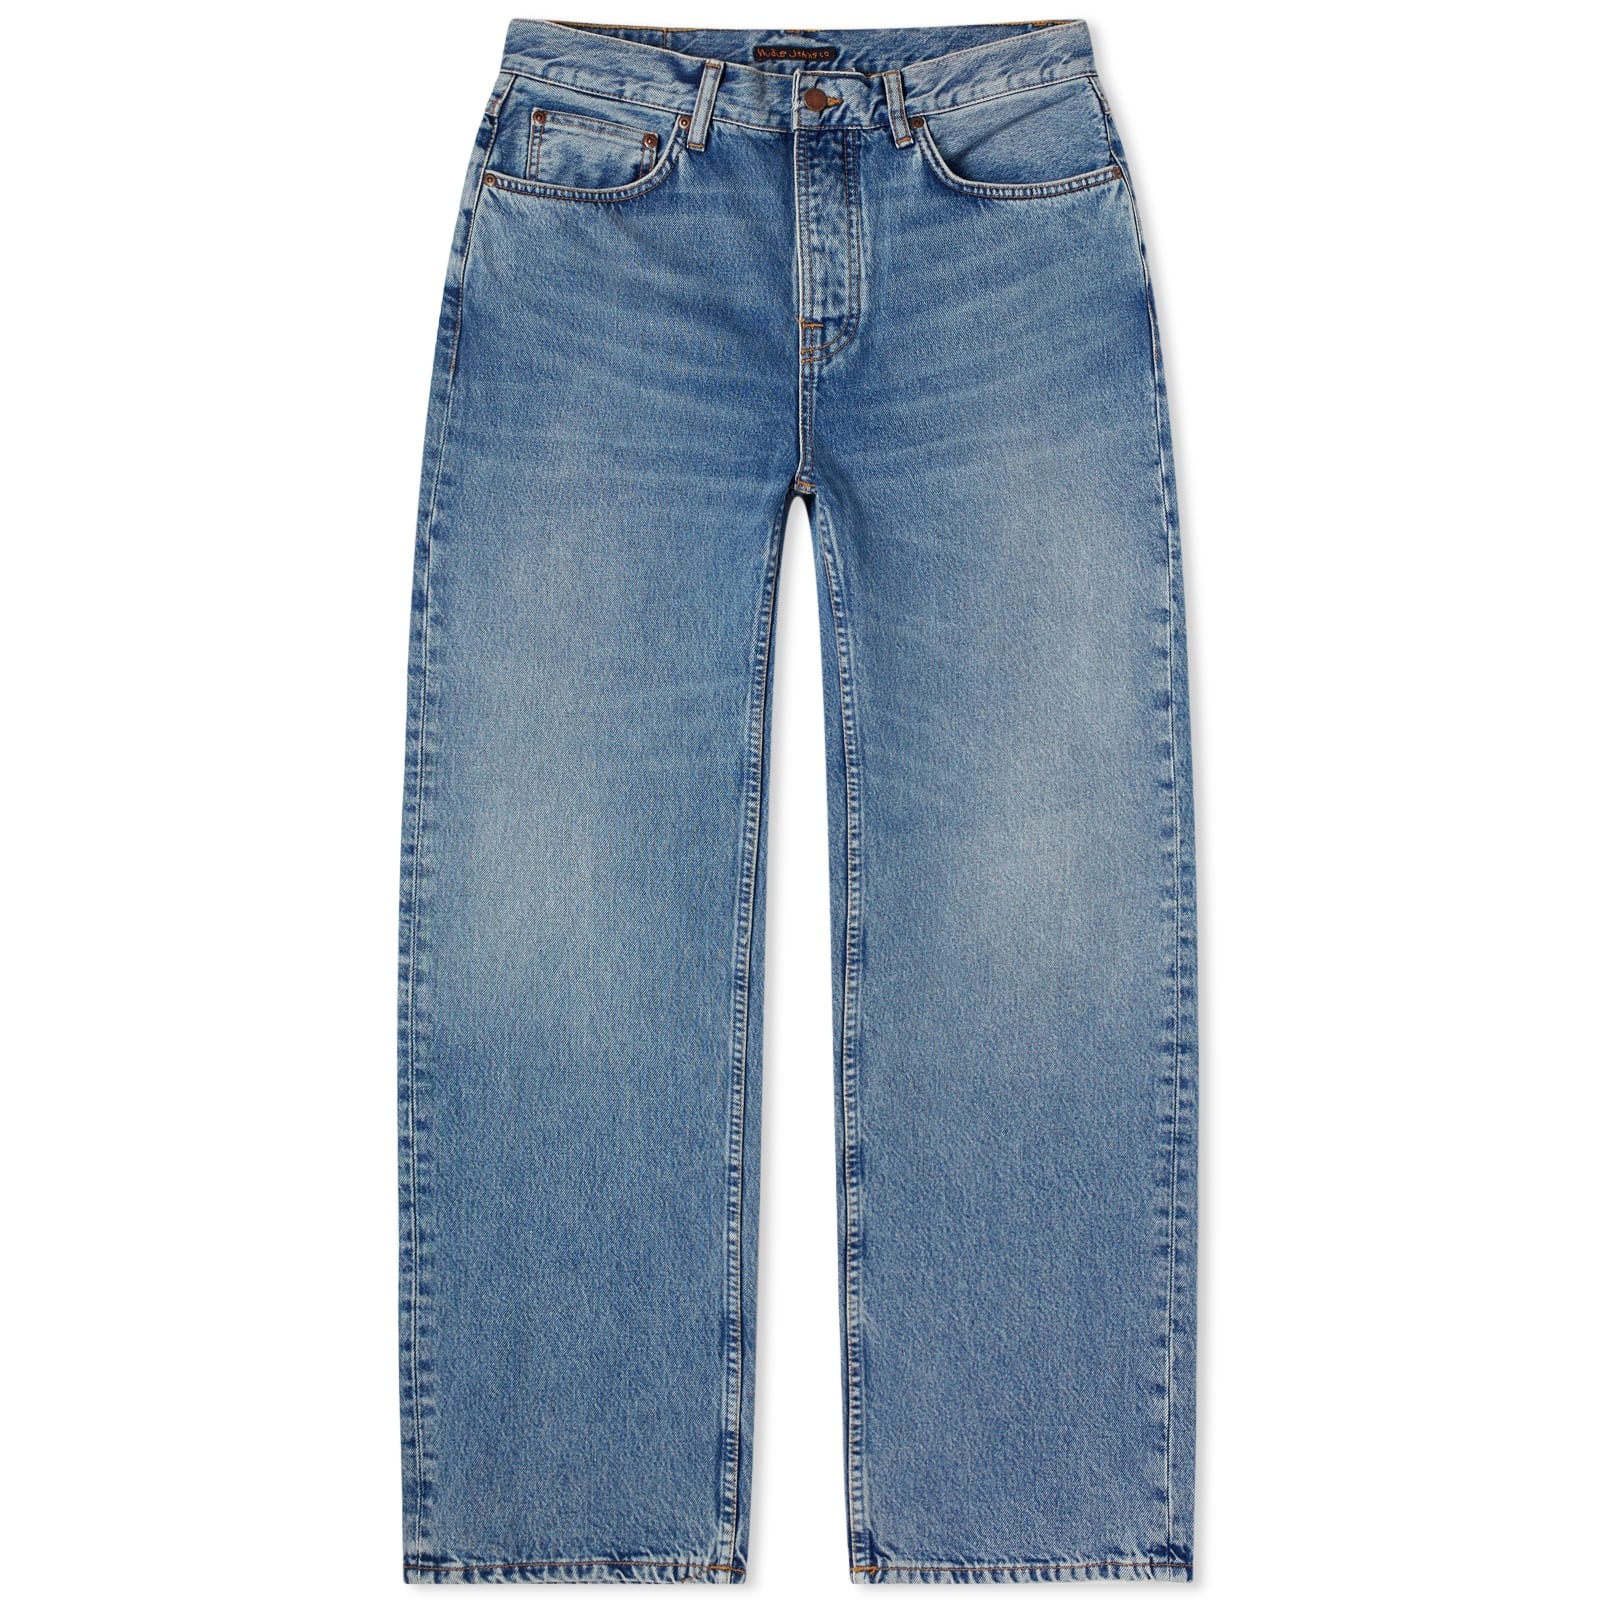 Nudie Jeans Co Tuff Tony Jeans - 1